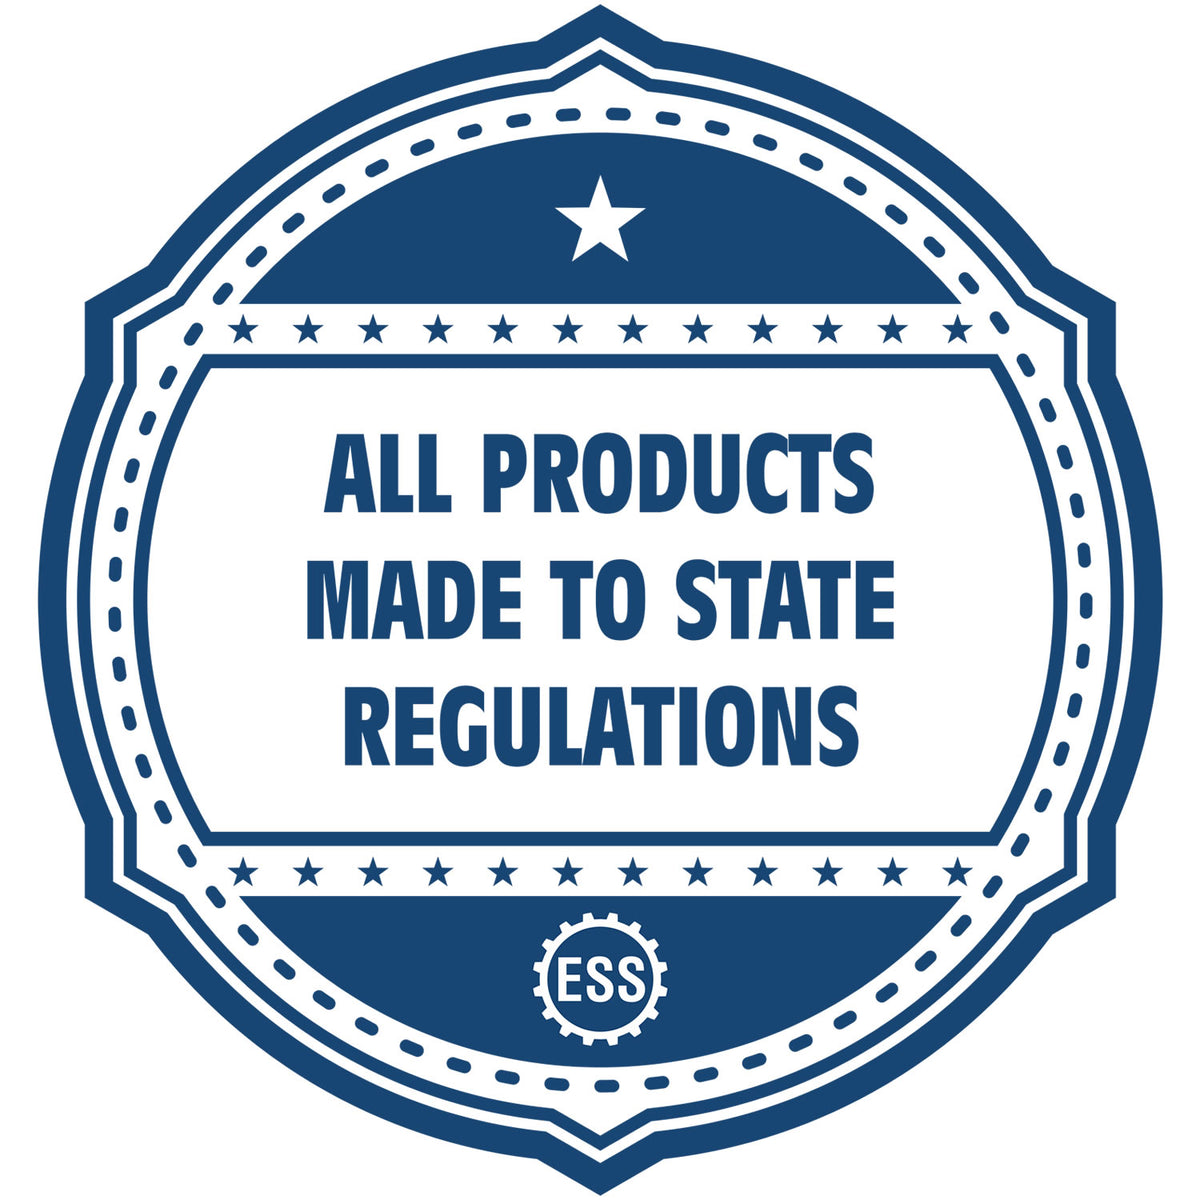 An icon or badge element for the MaxLight Premium Pre-Inked Texas State Seal Notarial Stamp showing that this product is made in compliance with state regulations.